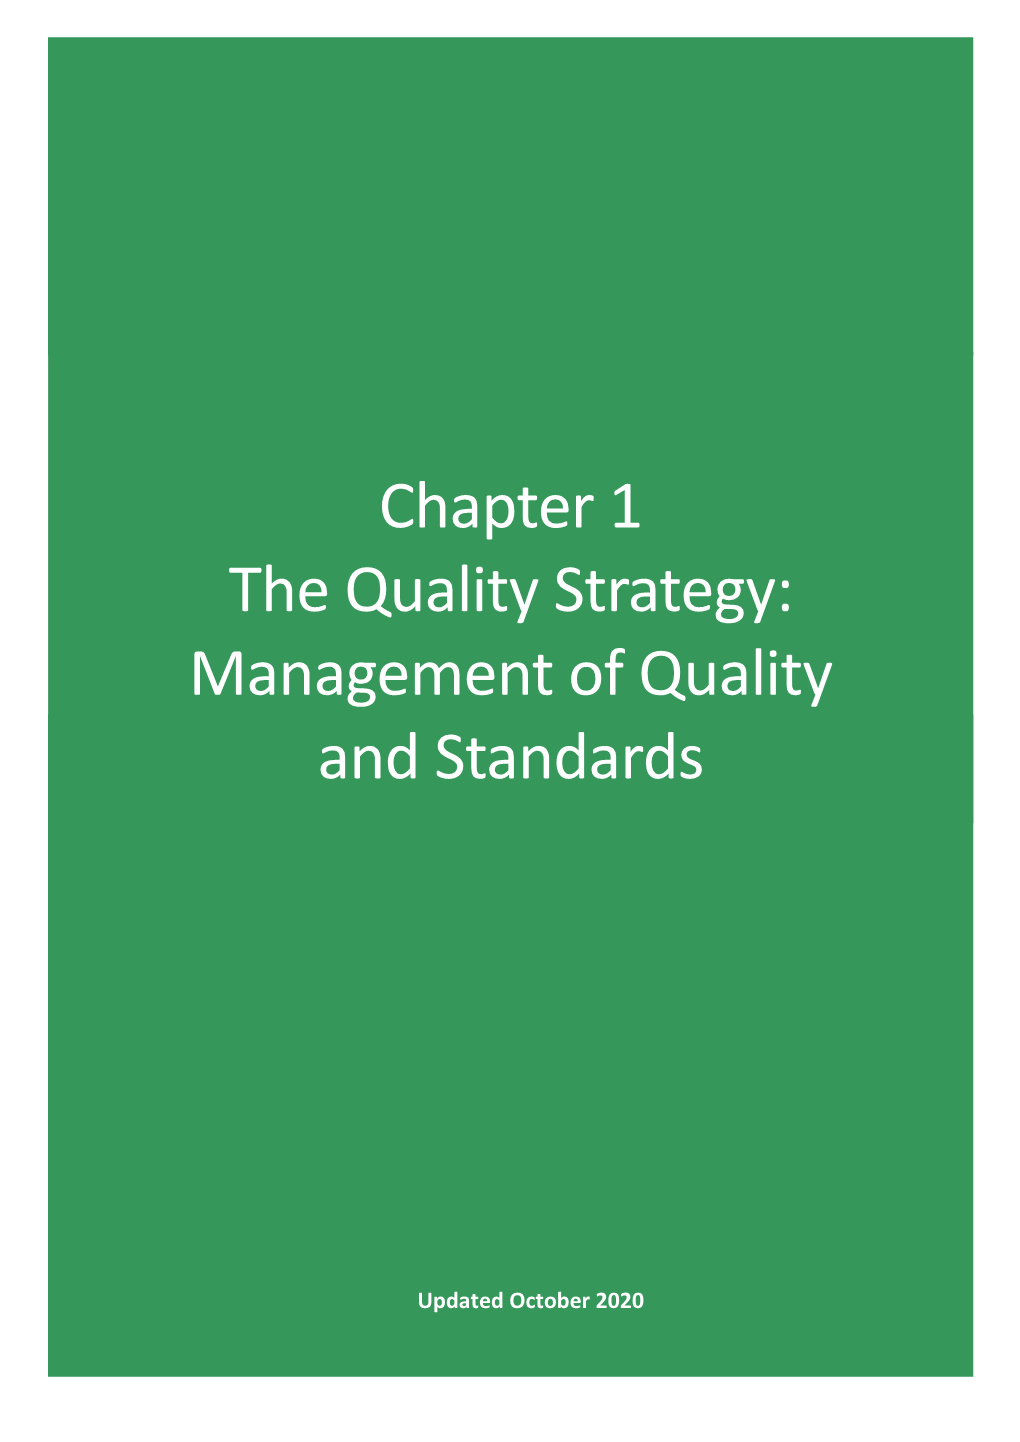 Quality Management Handbook Chapter 1 the Quality Strategy: Management of Quality and Standards